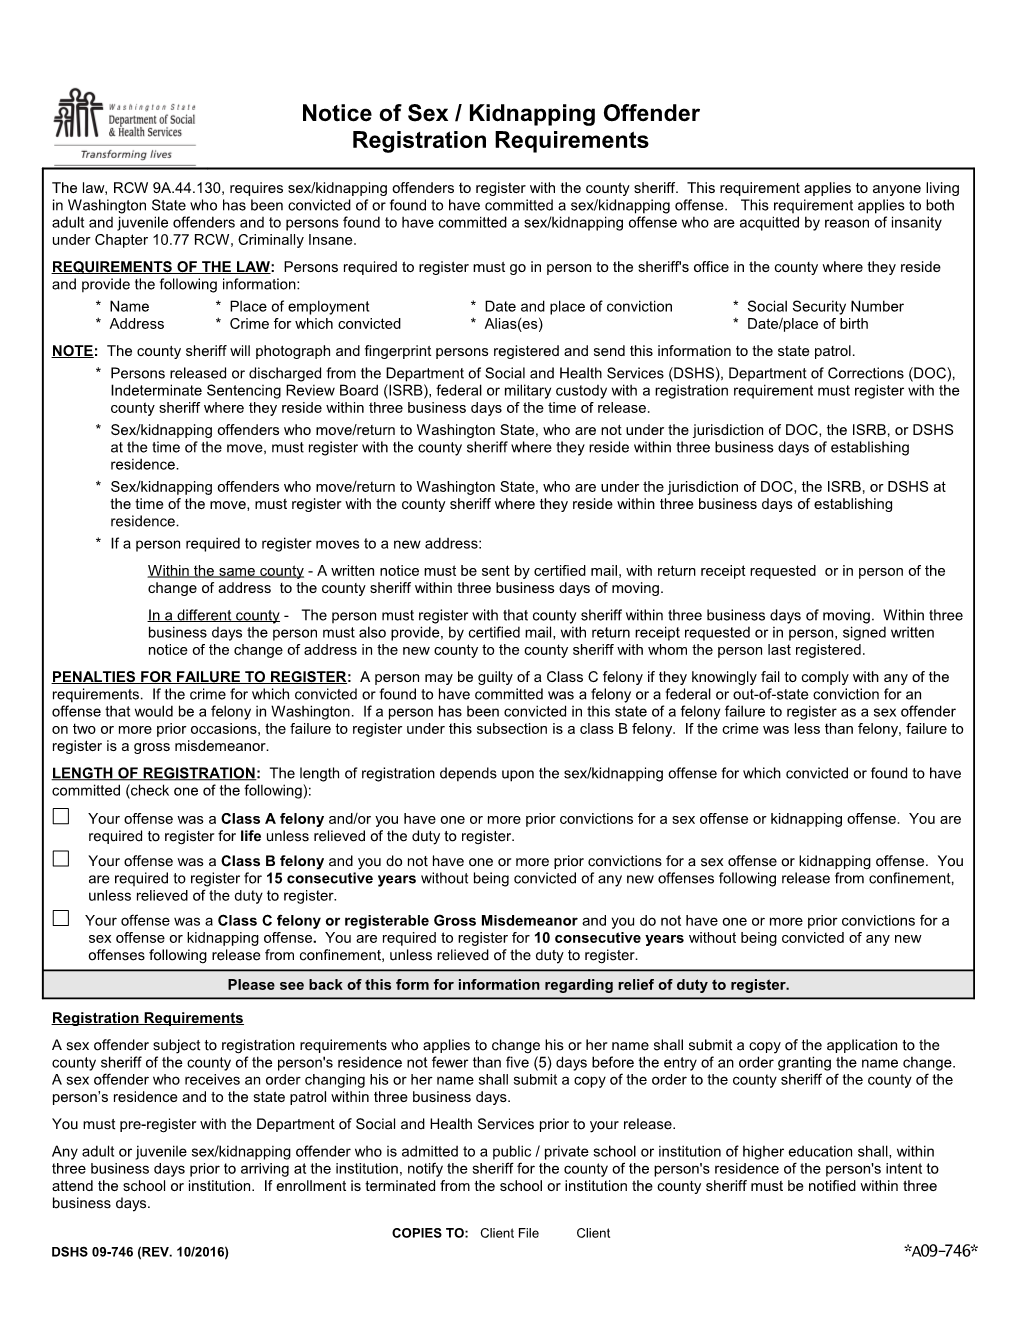 Notice of Sex / Kidnapping Offender Registration Requirements